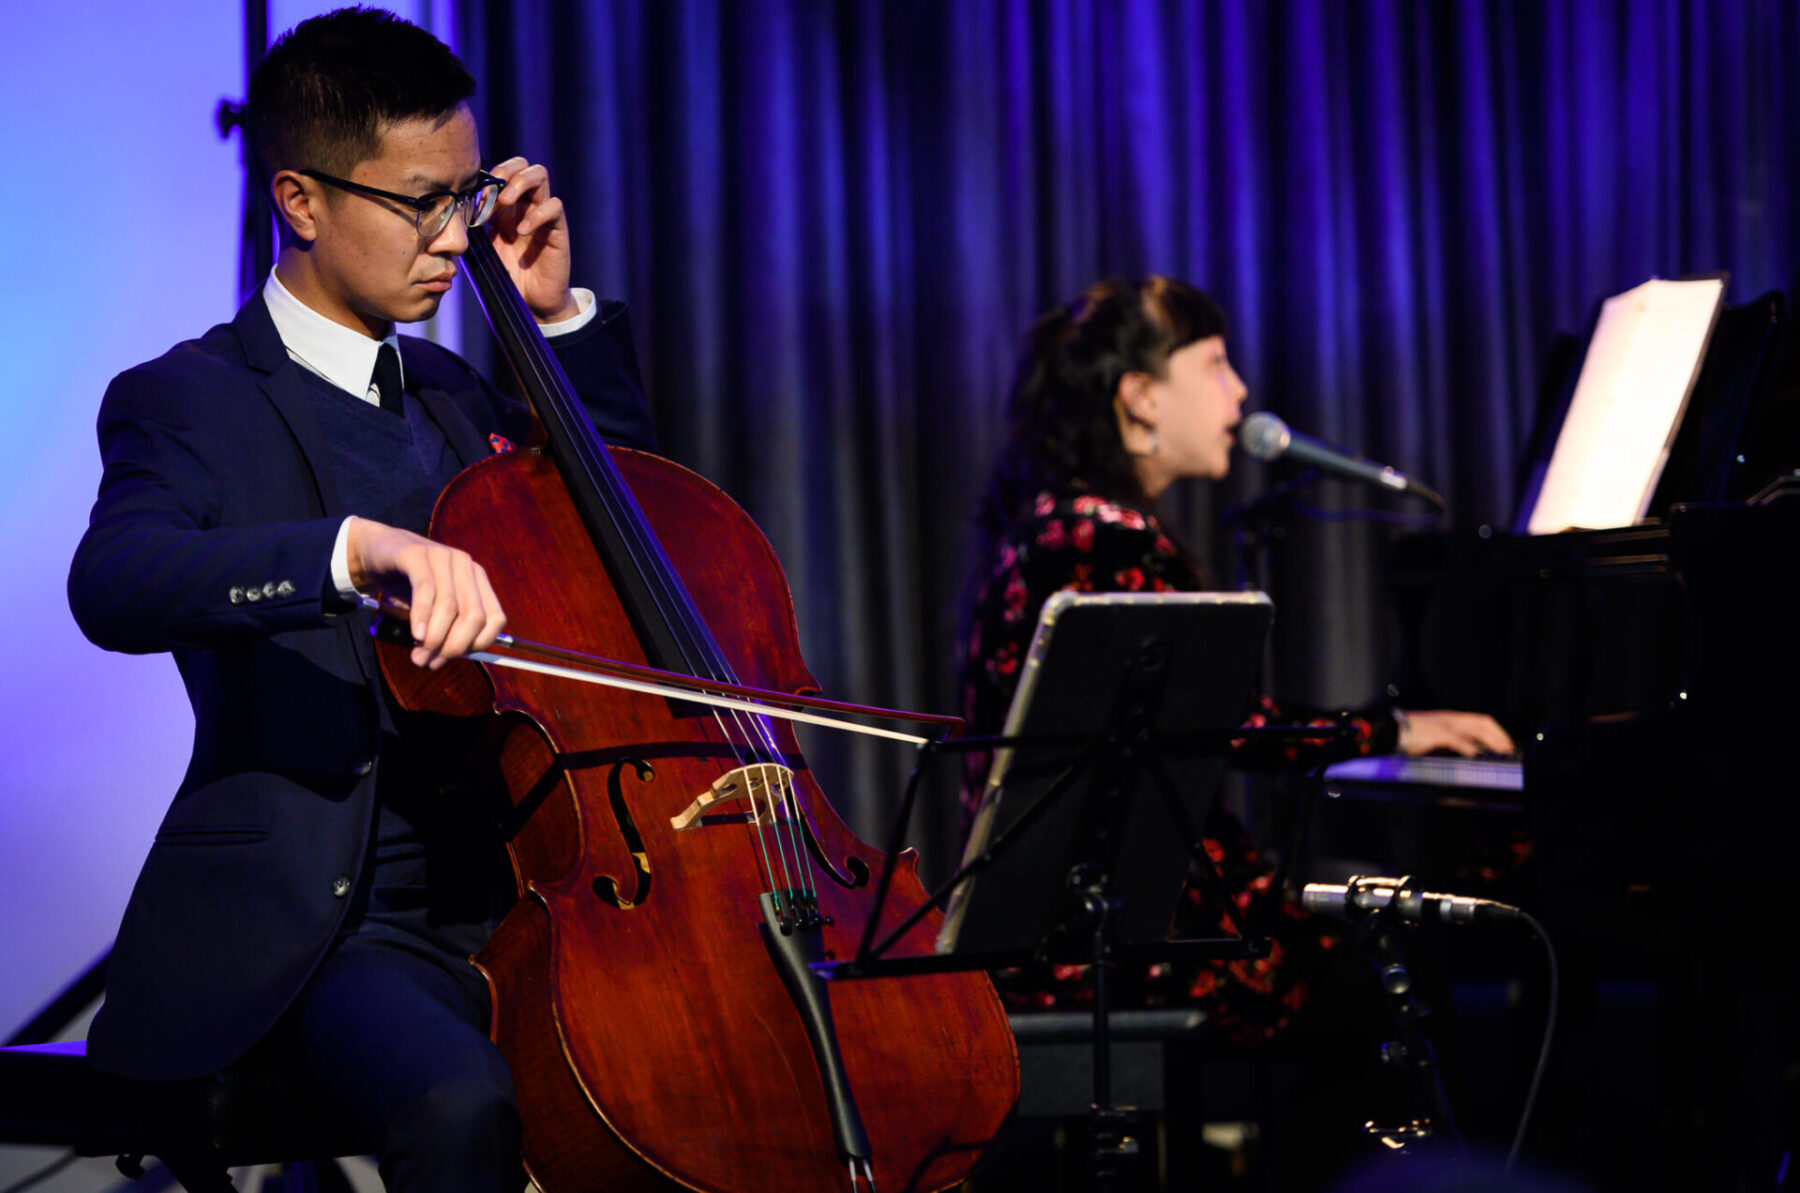 Jonathan Lo in a blue suit on the cello with Robyn Jacob at the piano in the background